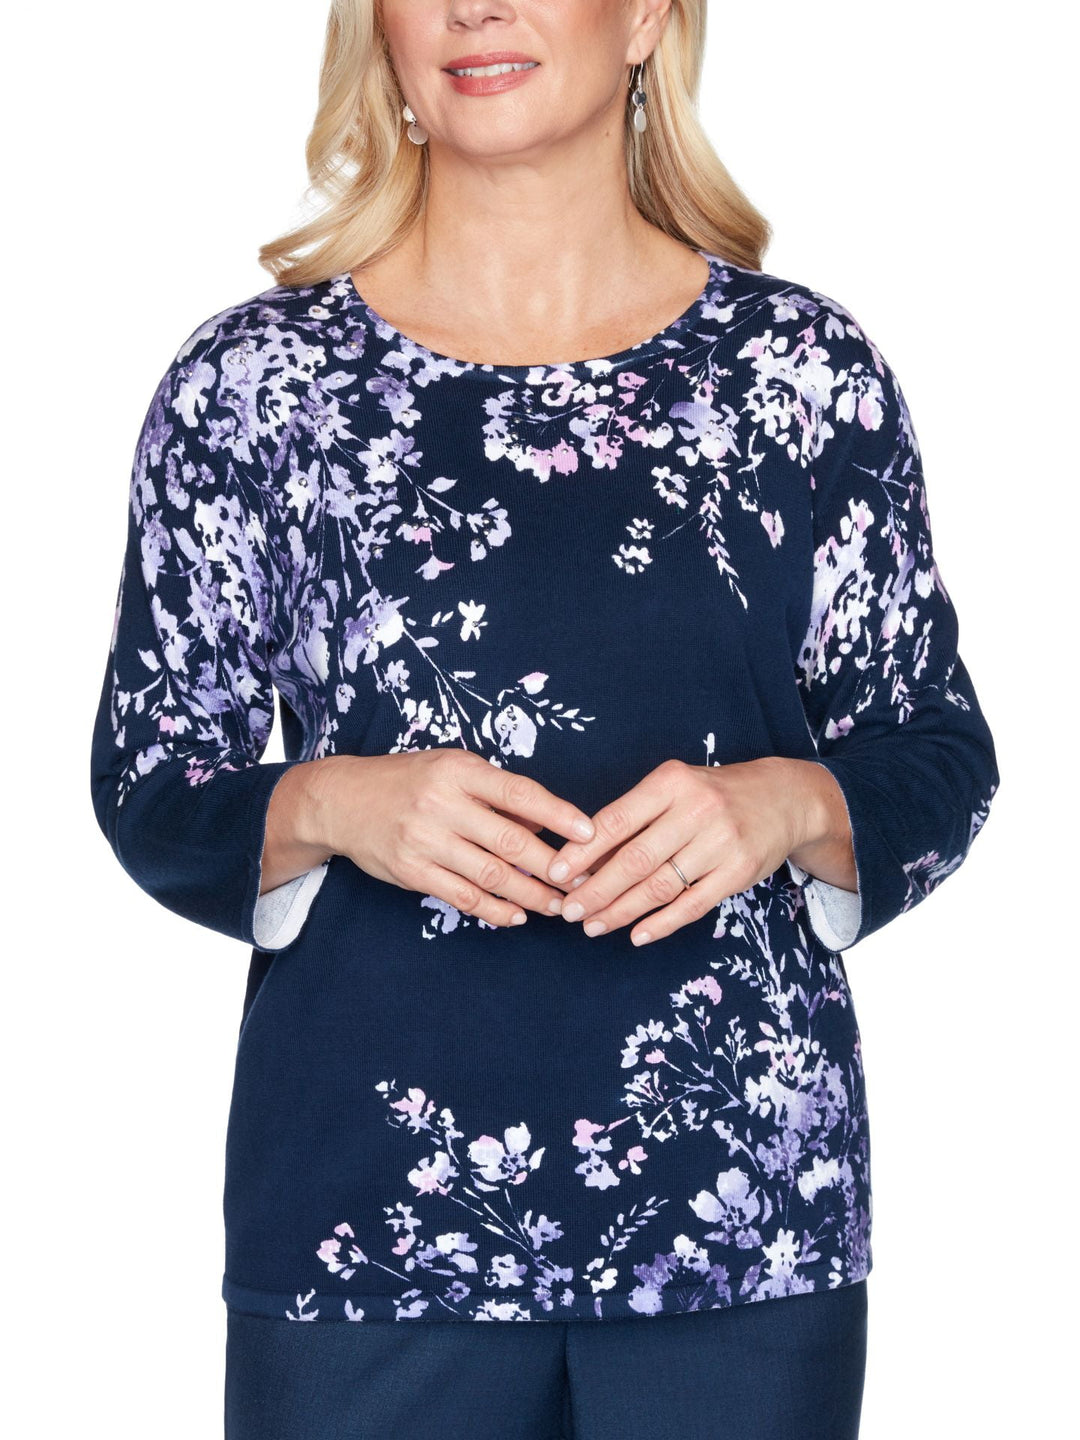 Alfred Dunner Women's Wisteria Lane Asymmetric Floral Print Sweater Blue Size 3X